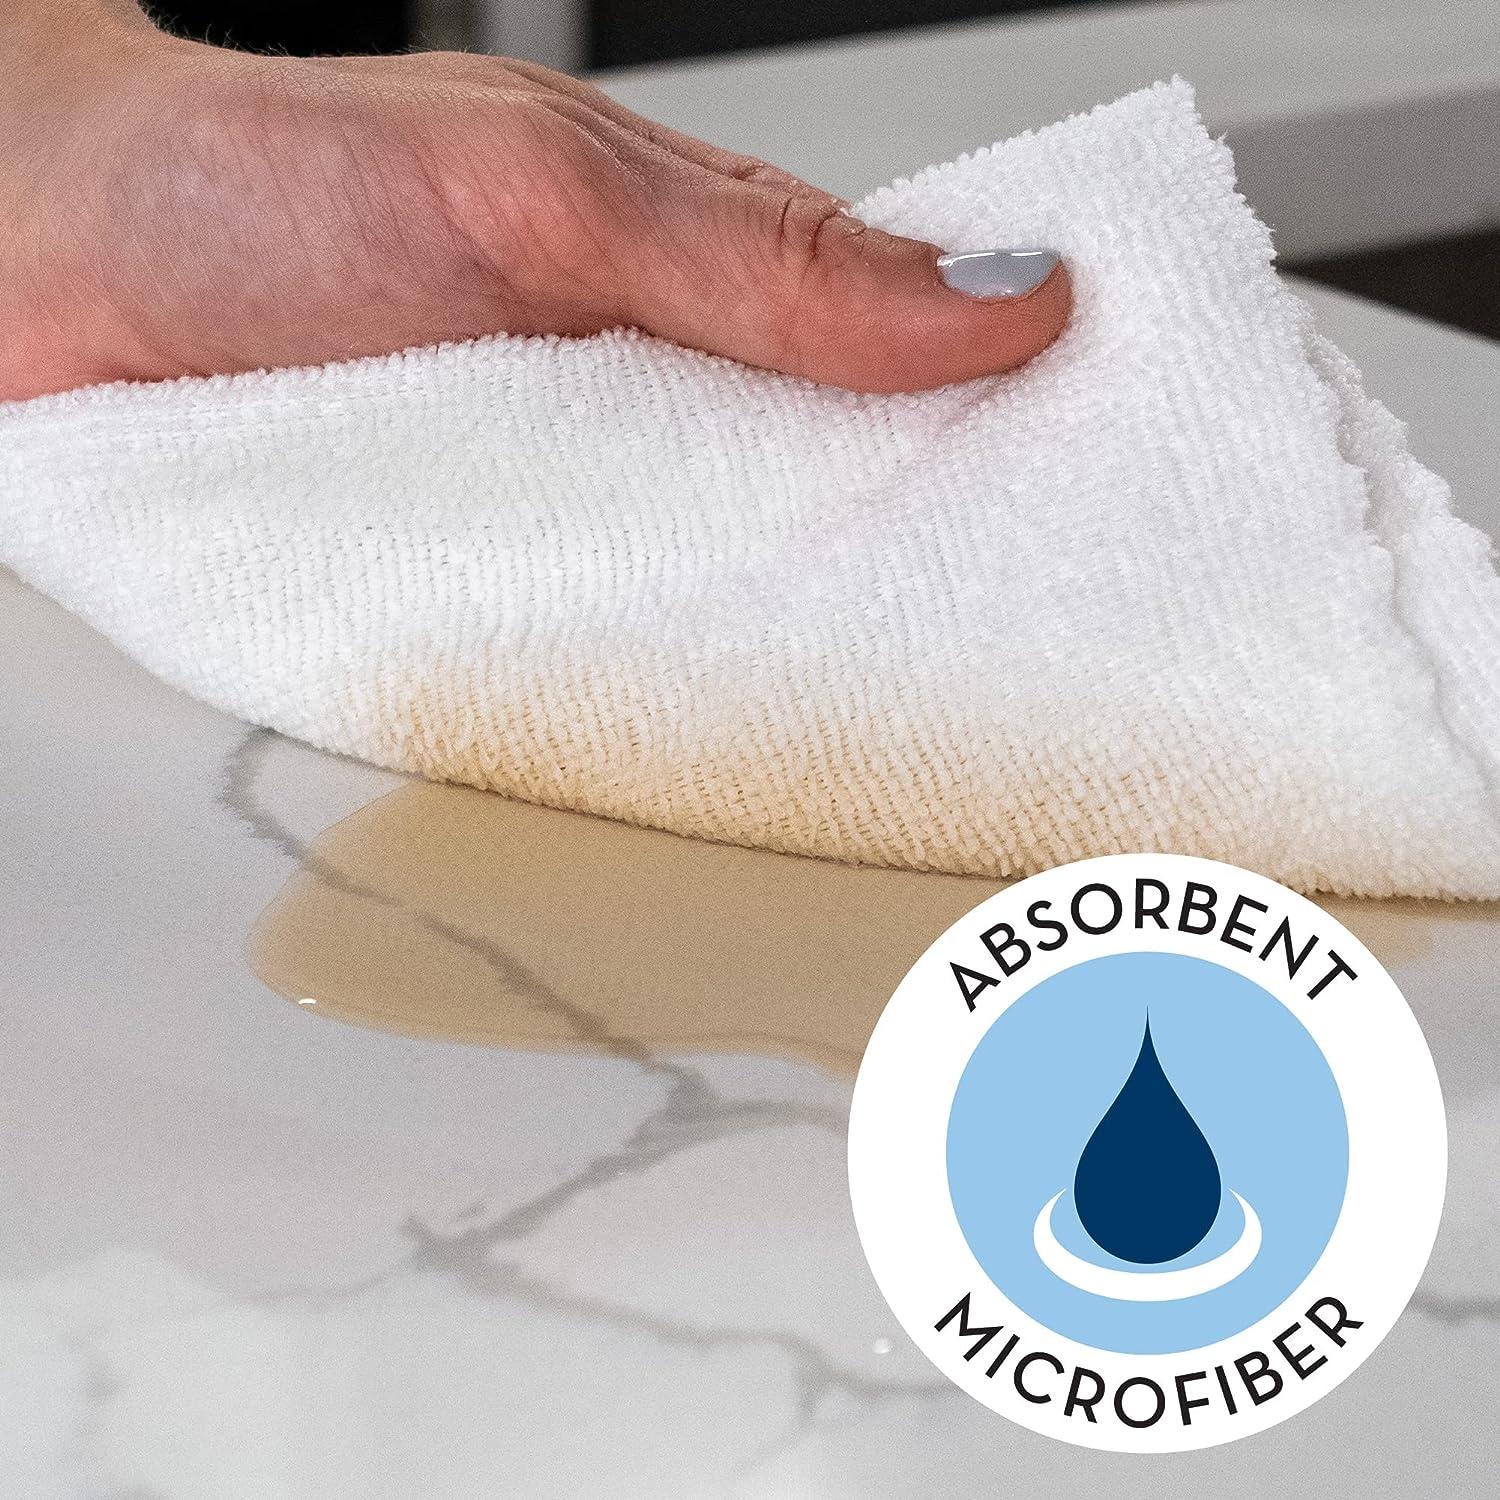 Microfiber Cleaning Cloth: Kitchen Cloth bulk-pack Reusable Color-coded  Streak-free Professional-grade Zero-waste 